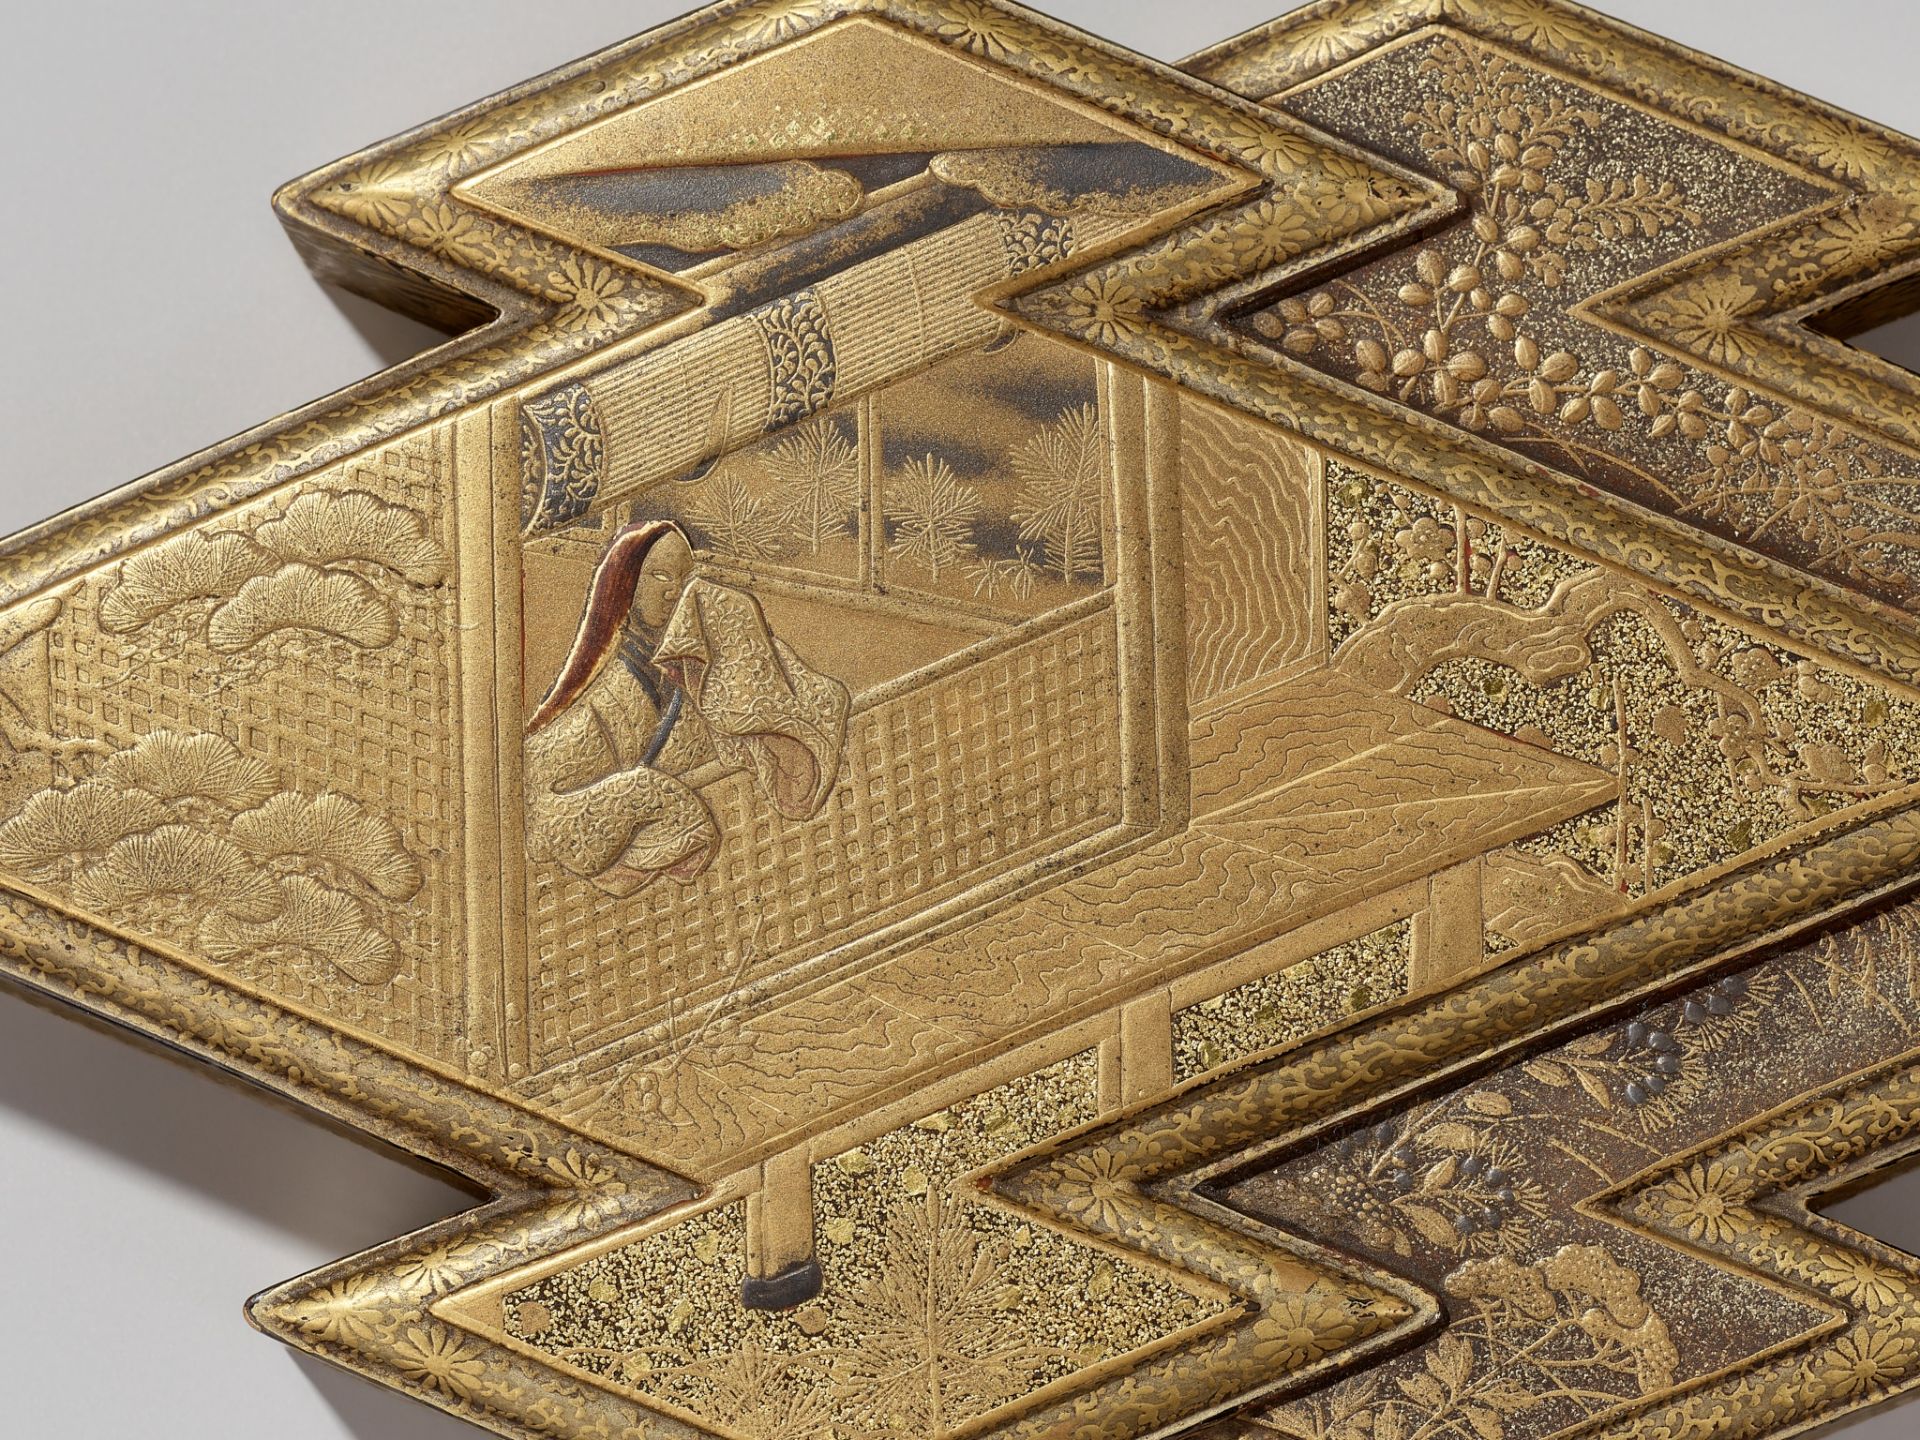 A FINE LACQUER BOX AND COVER WITH INTERIOR TRAY - Image 9 of 11